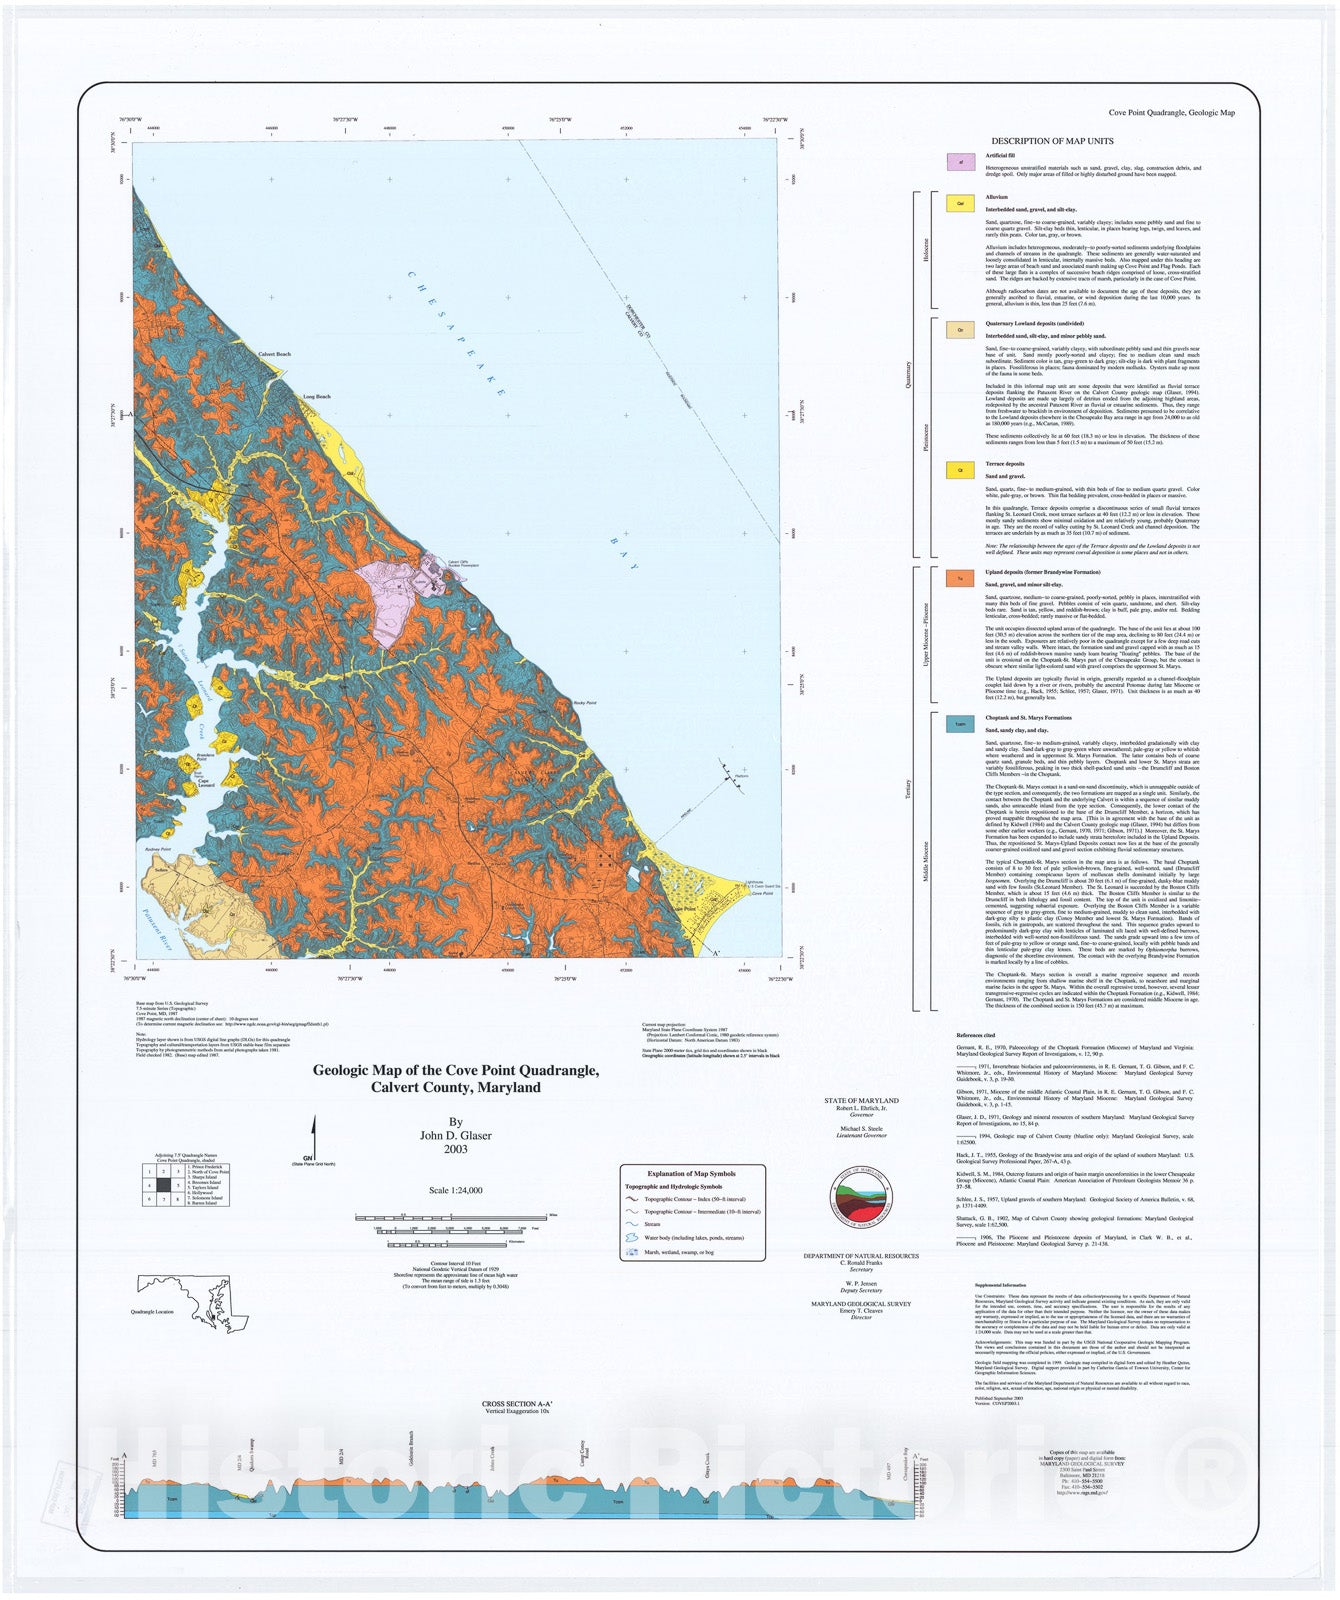 Map : Geologic map of the Cove Point quadrangle, Calvert County, Maryland, 2003 Cartography Wall Art :